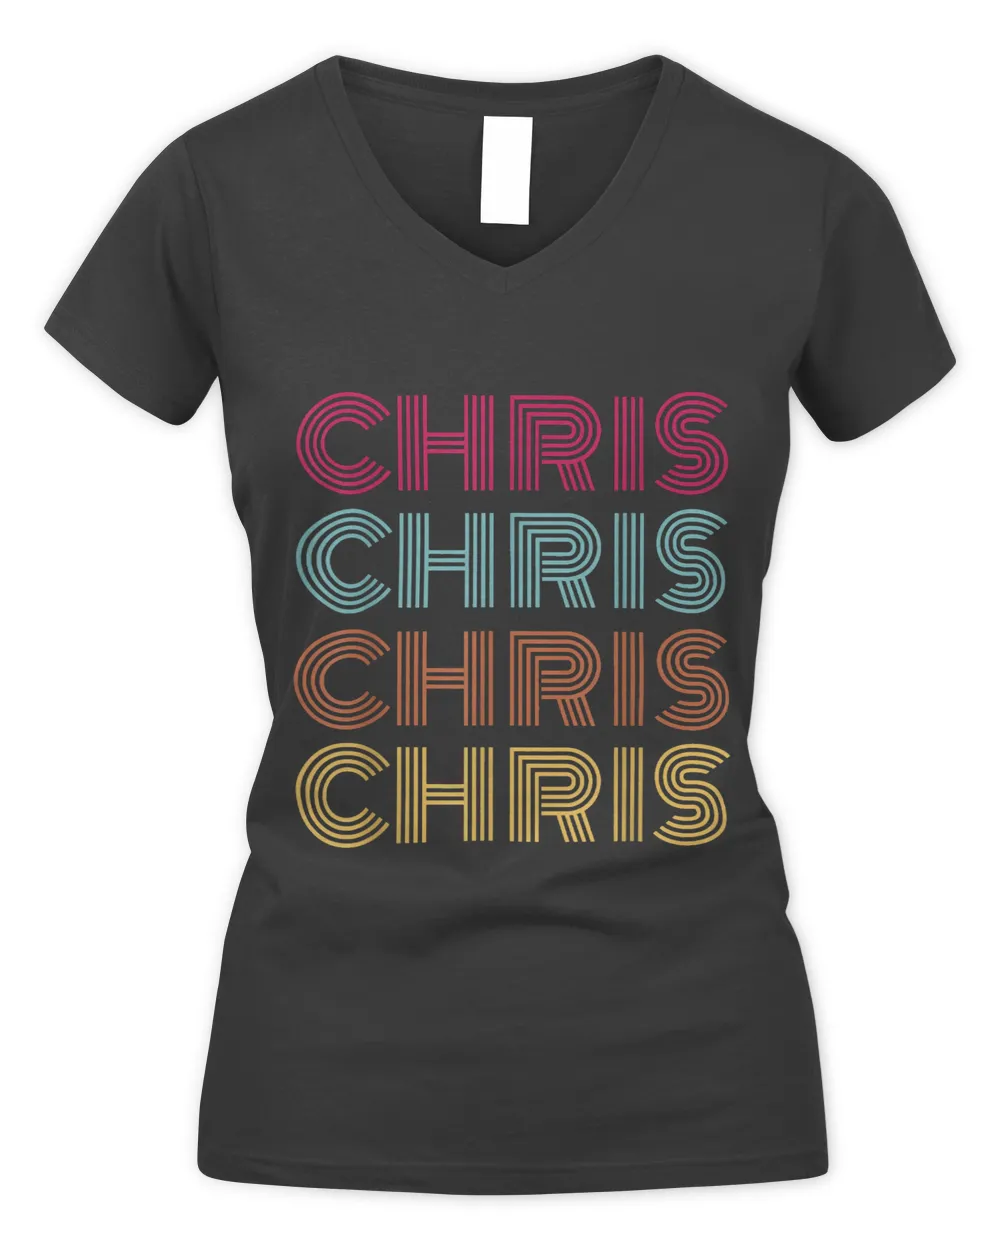 Chris first given name pride vintage repeated word